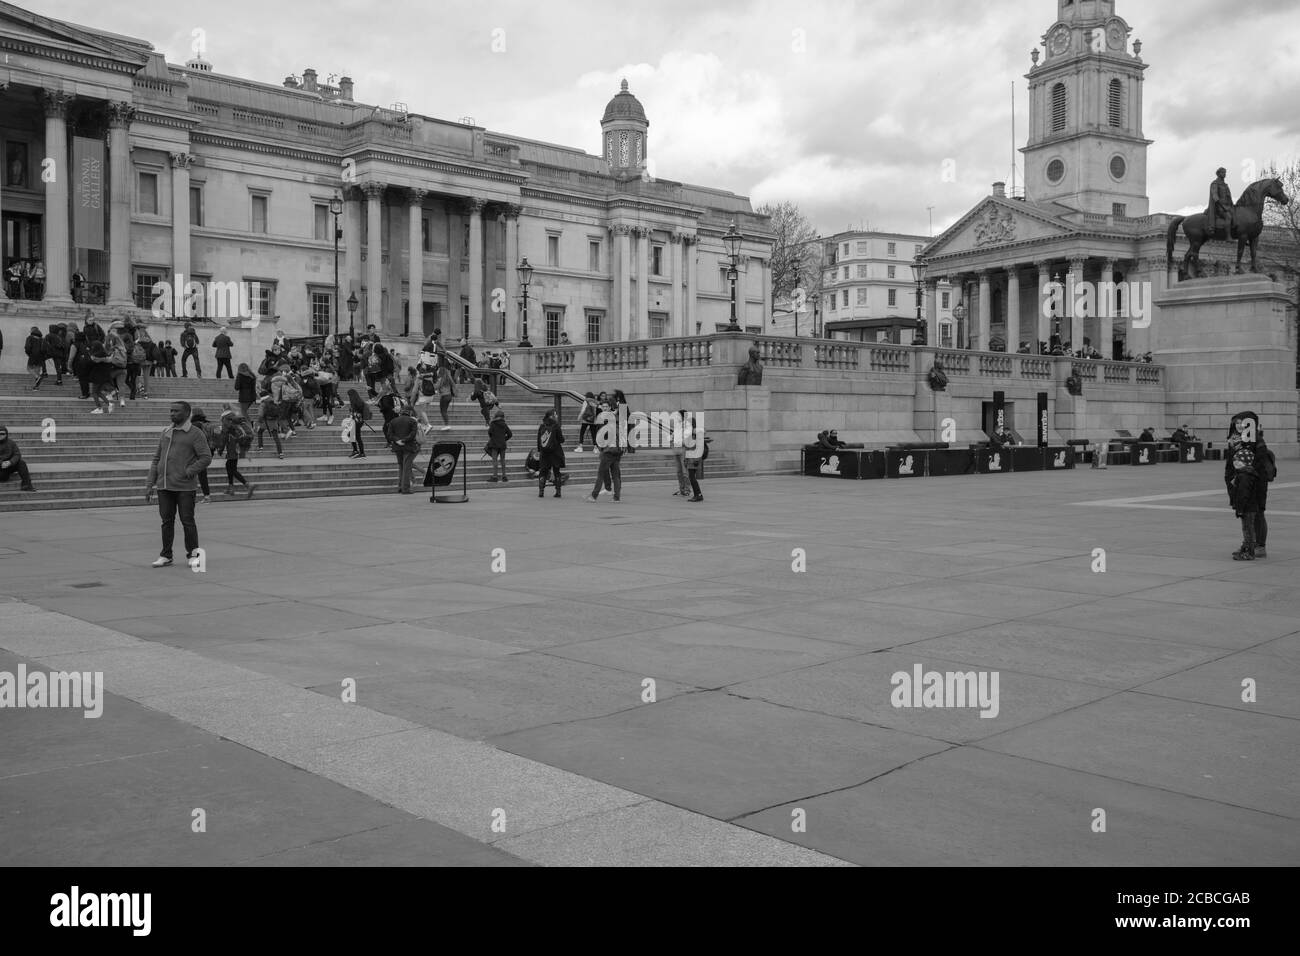 Black and white image and general view of Trafalgar Square London with the National Gallery museum and St Martin in the Fields in the background. Stock Photo